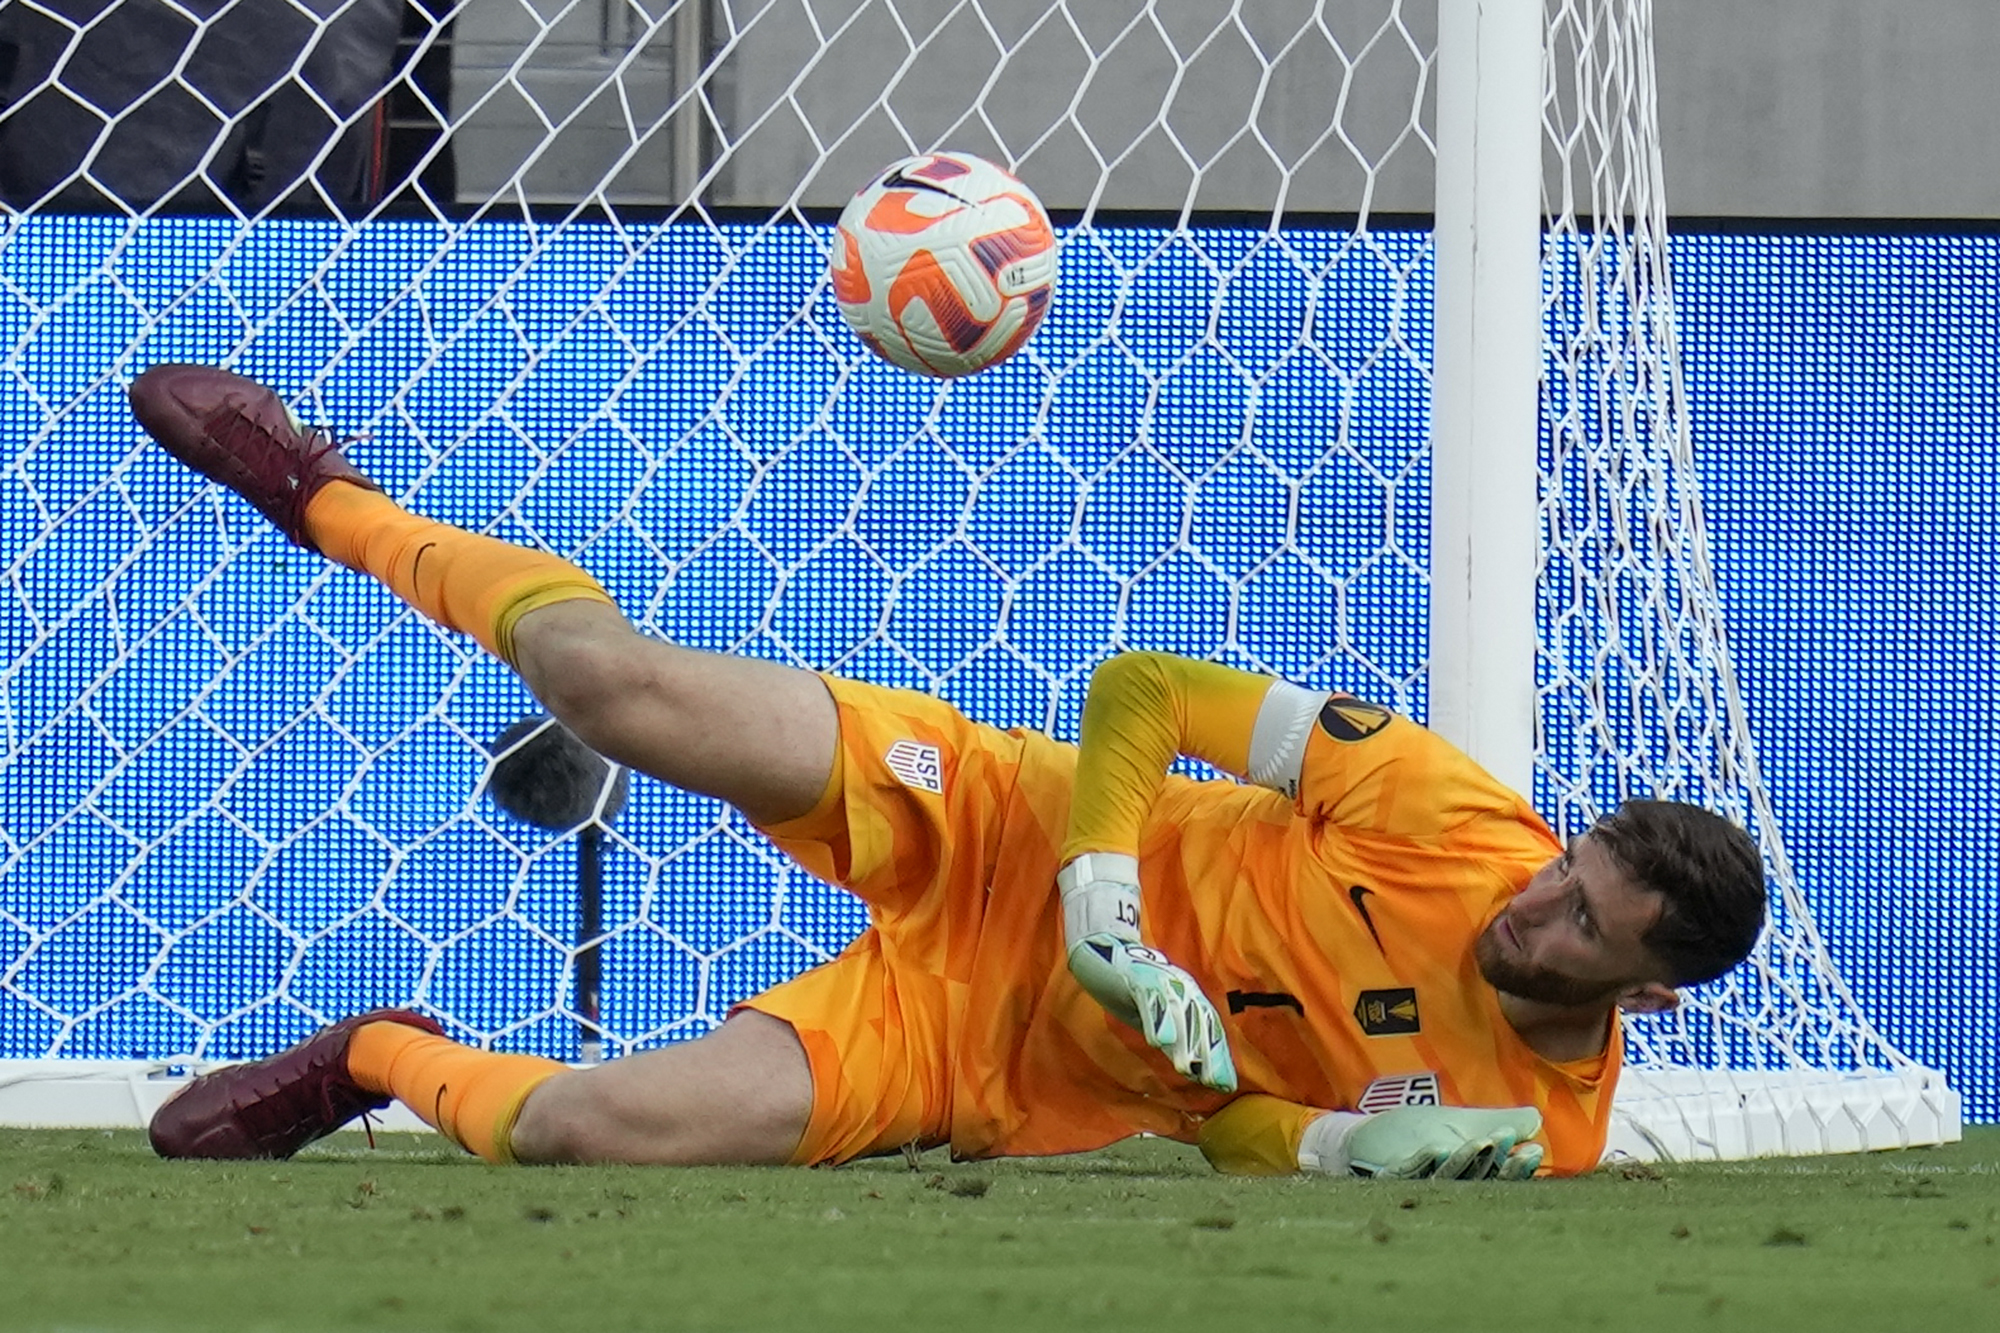 Panama upset US 5-4 on penalty kicks after 1-1 tie to reach CONCACAF Gold  Cup final